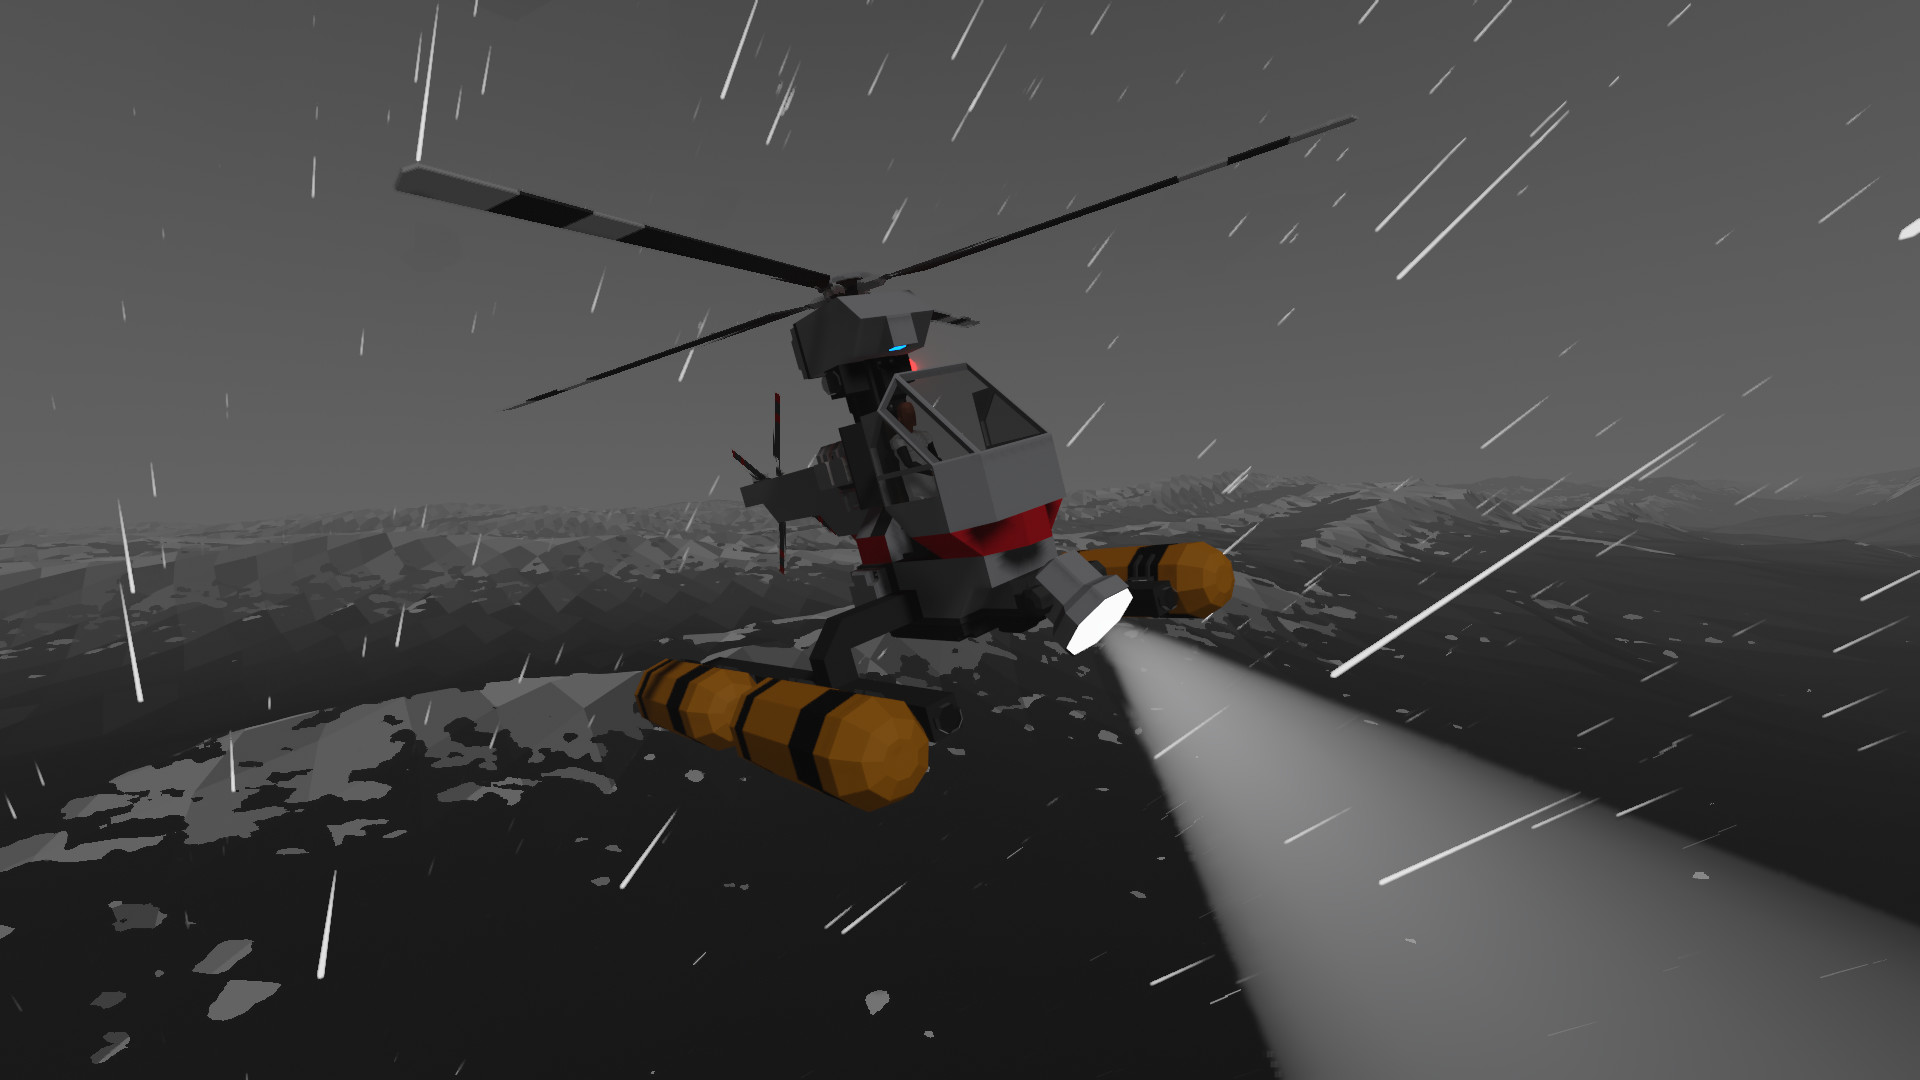 Stormworks Build and Rescue for ios instal free